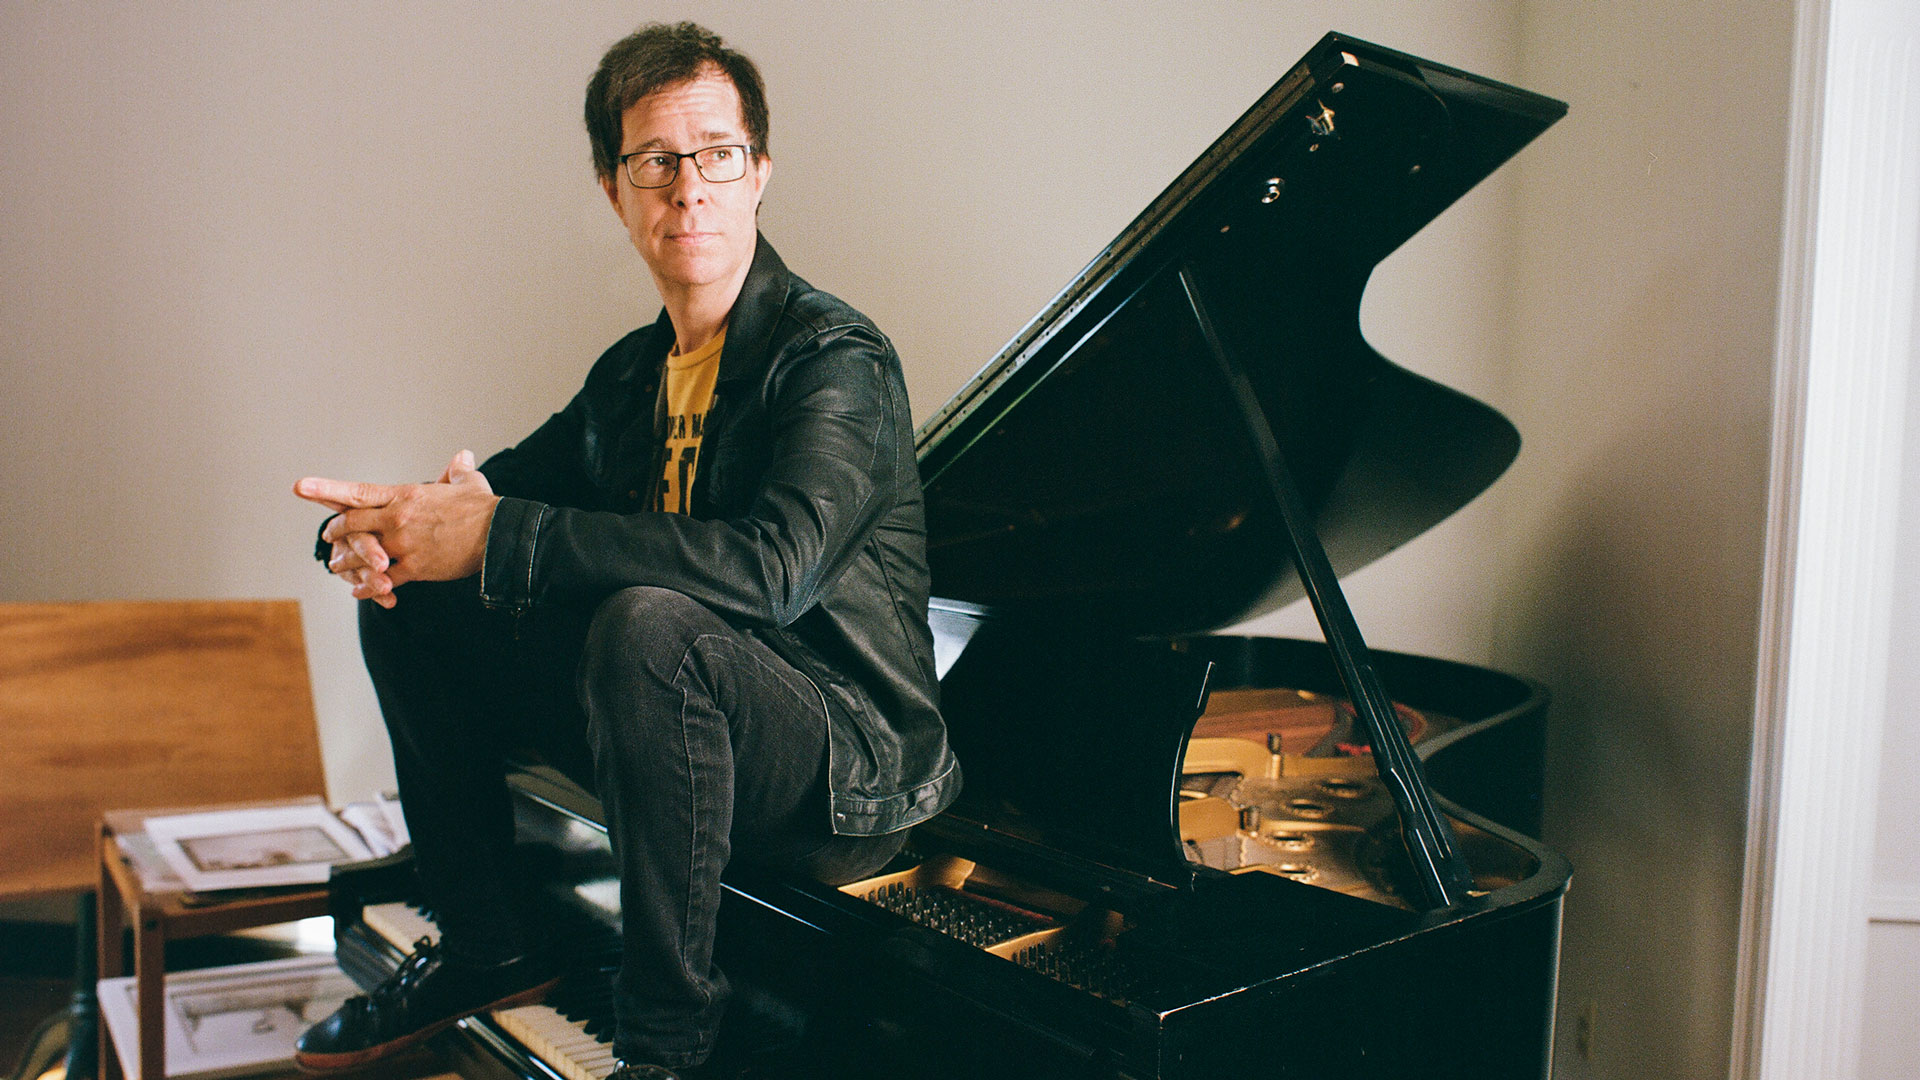 Ben Folds sitting on a piano